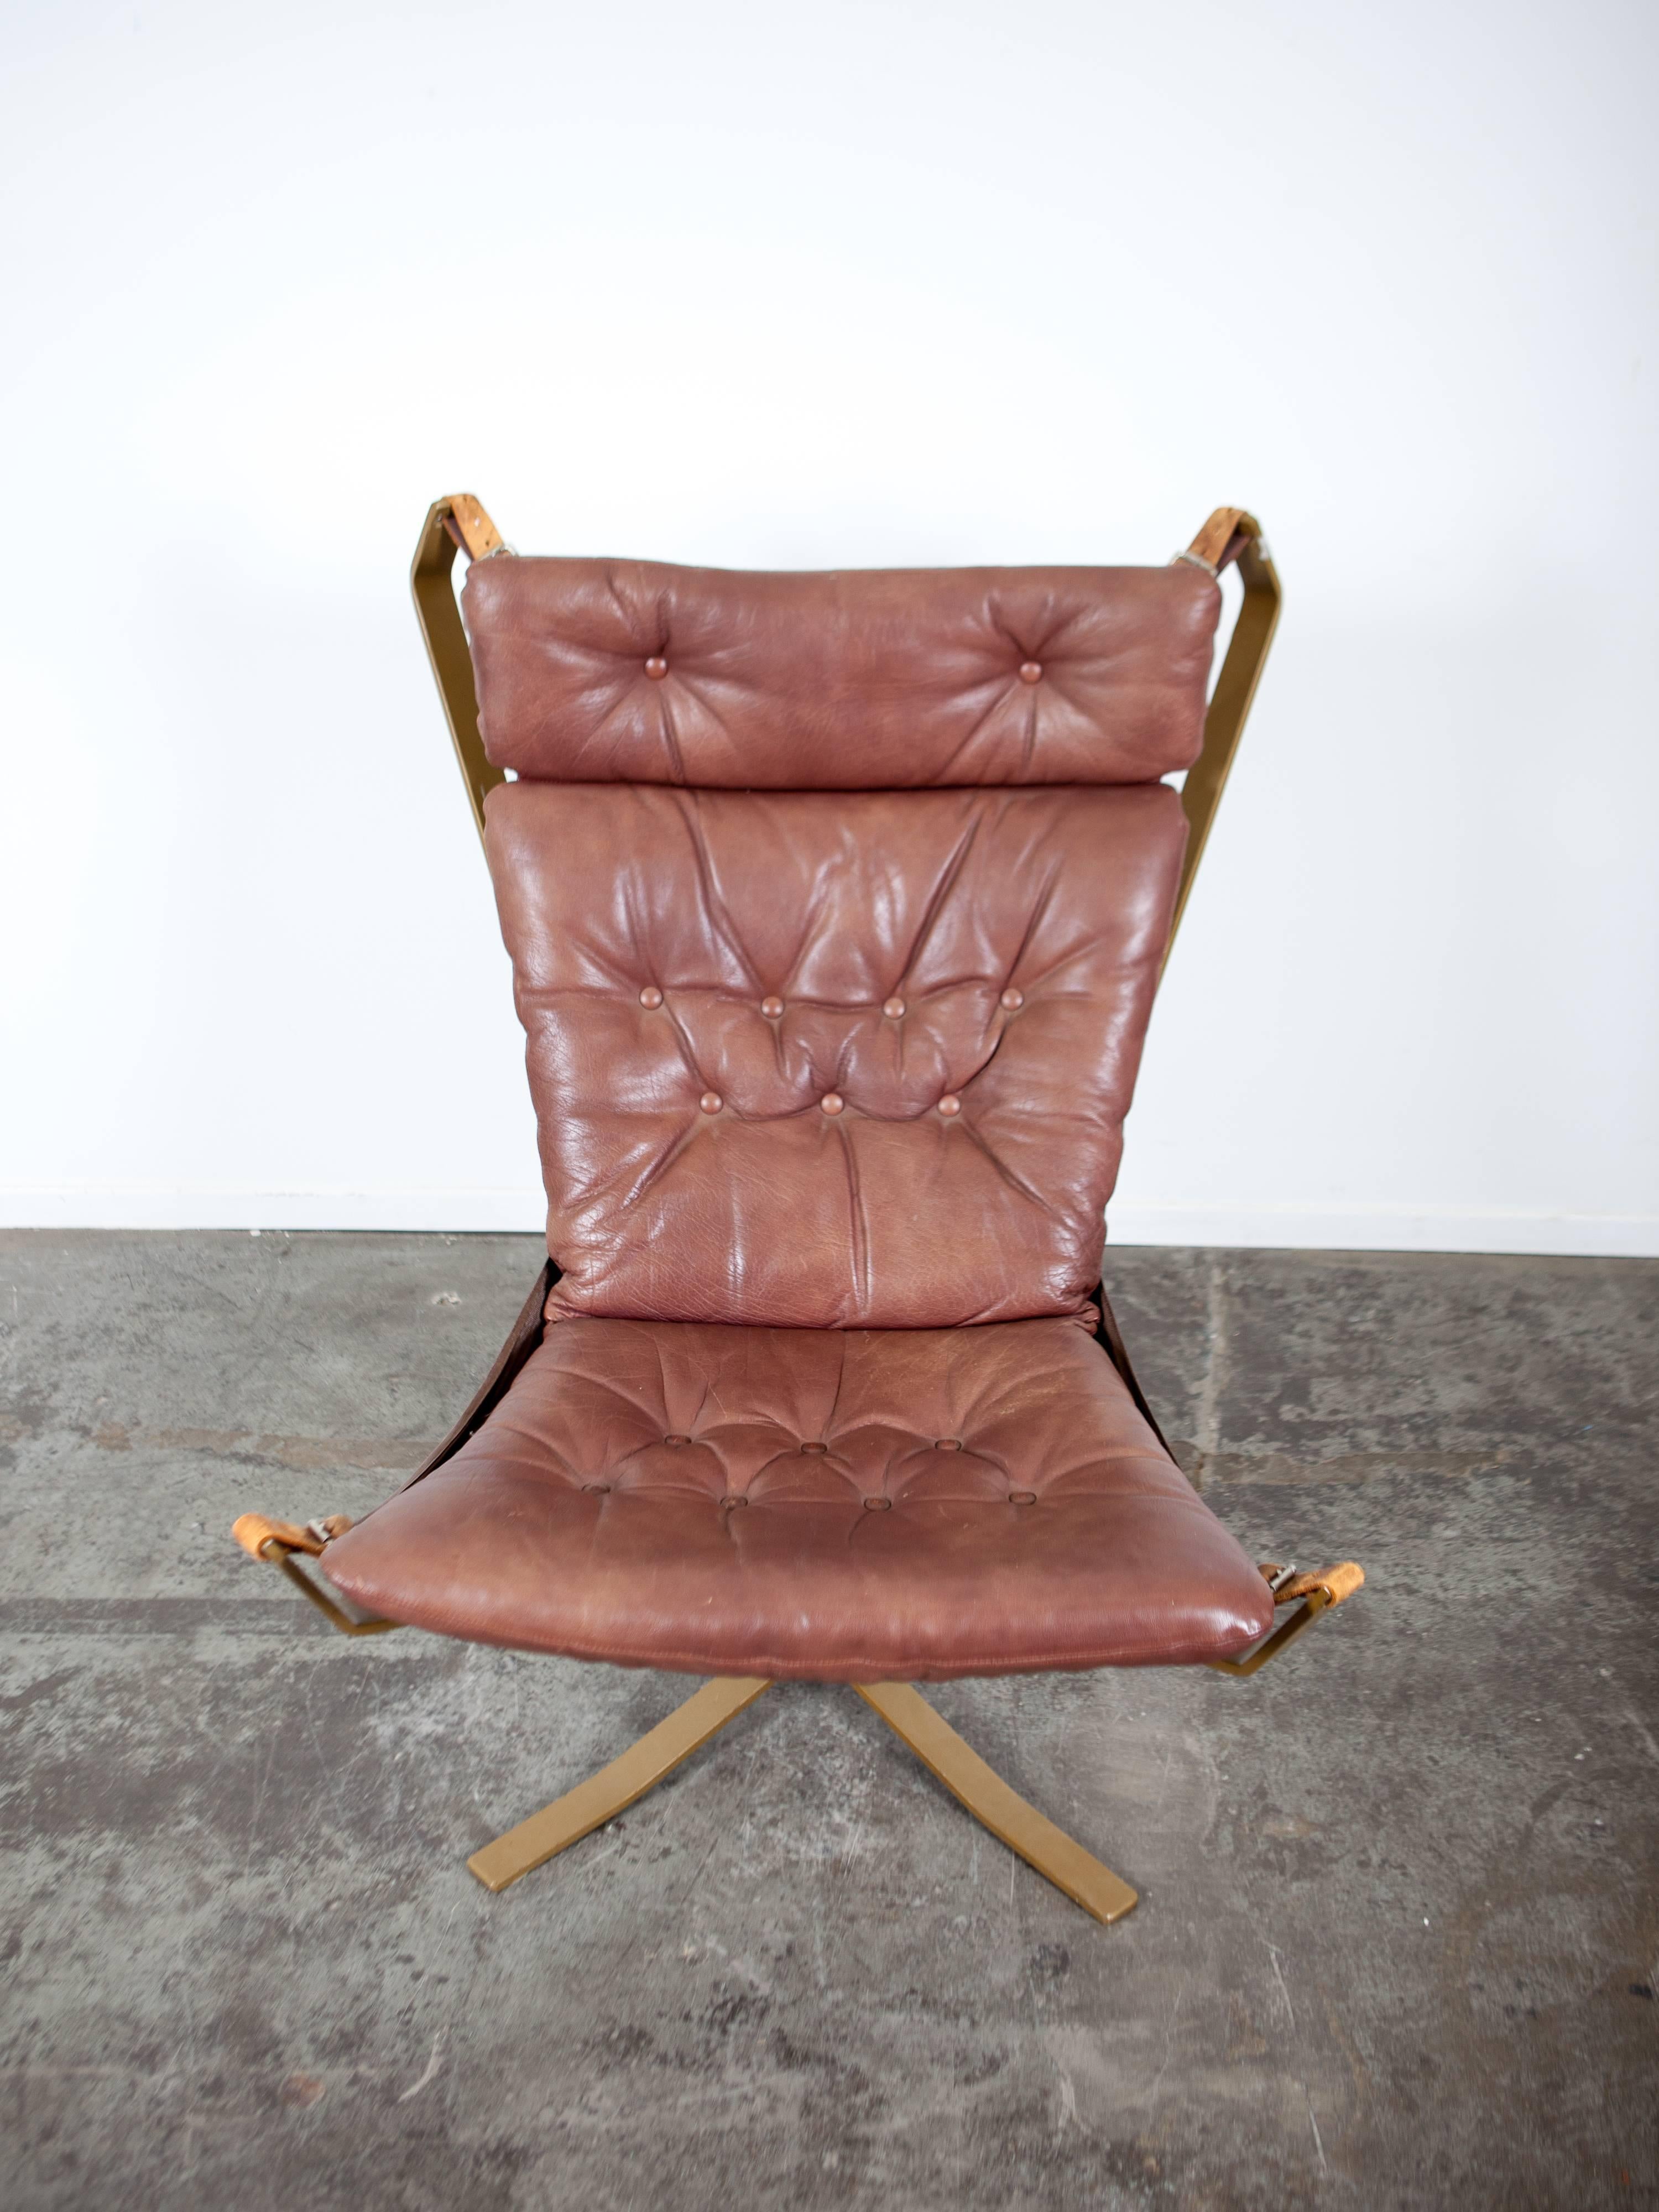 Metal Danish leather and metal framed Falcon-style chair, 1960's.